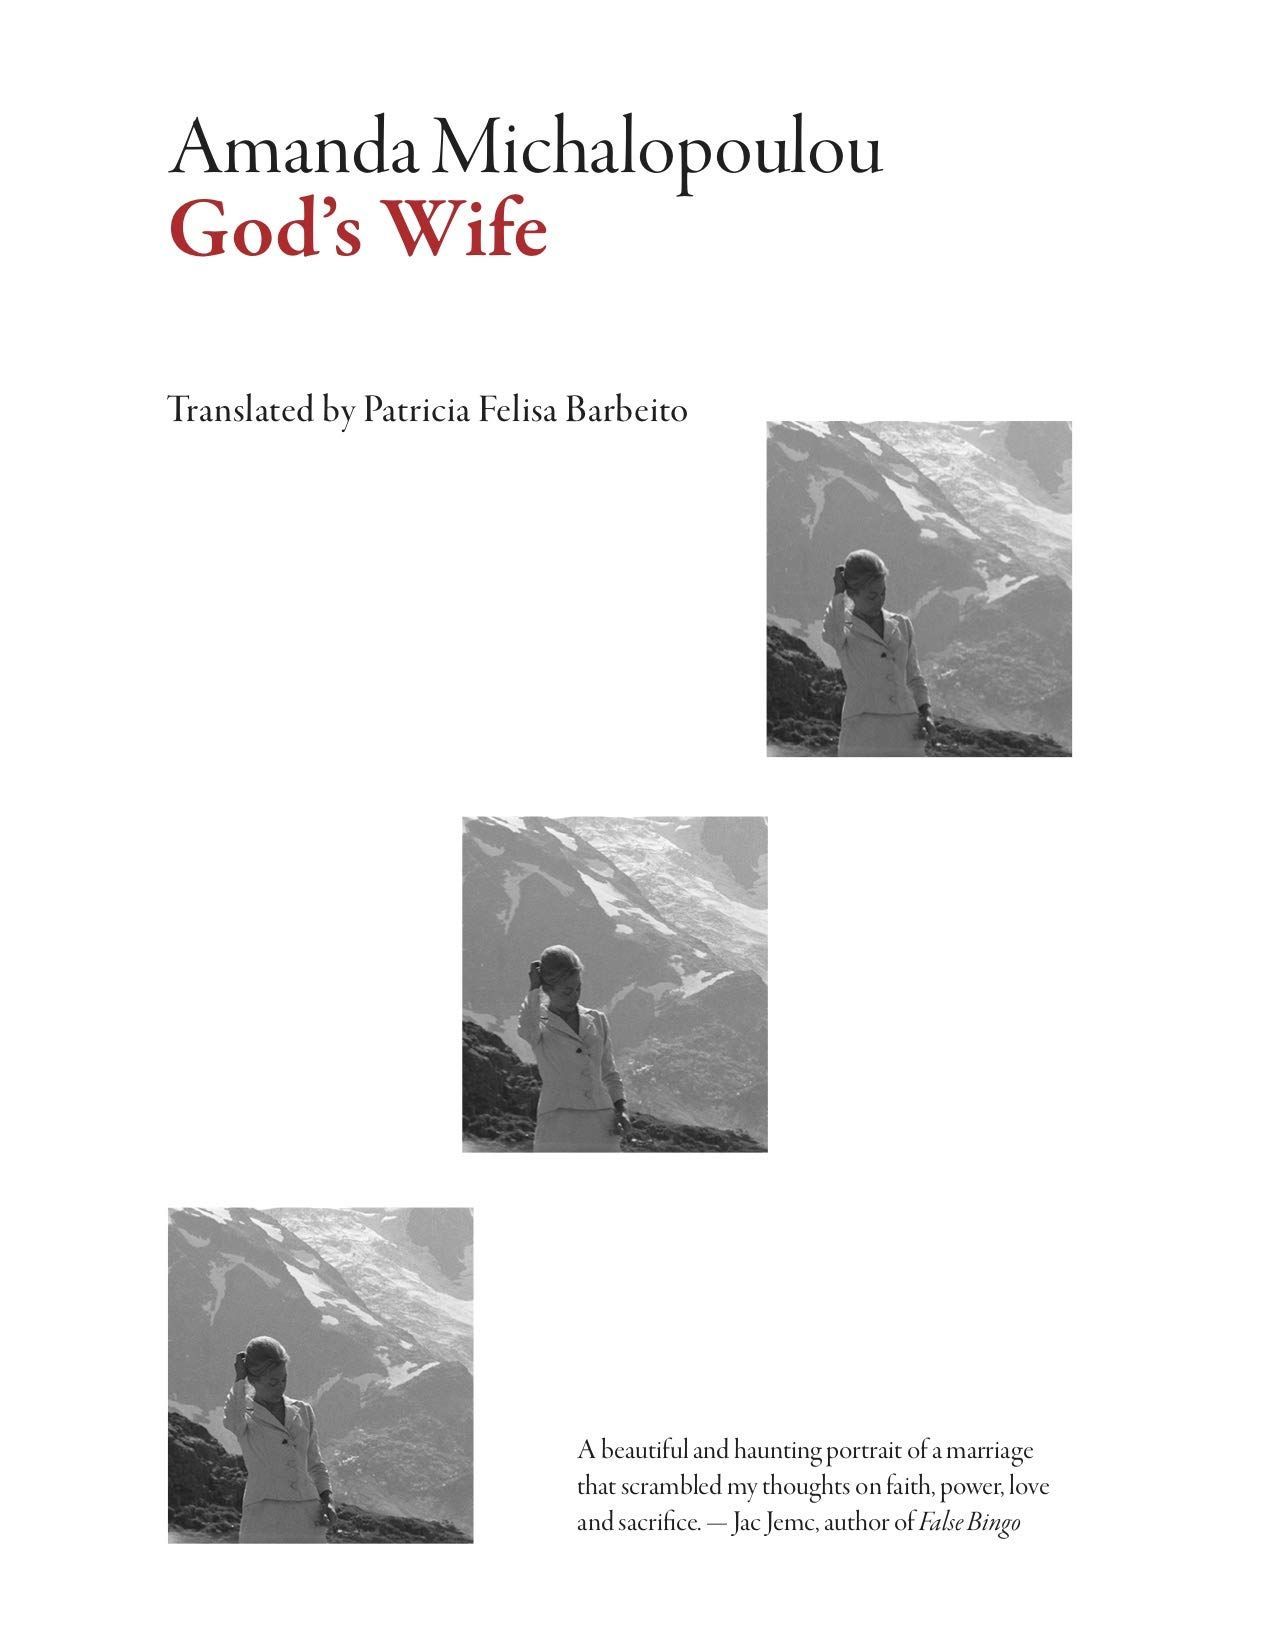 The Father, the Son, and the Terrible Husband: On Amanda Michalopoulou’s “God’s Wife”